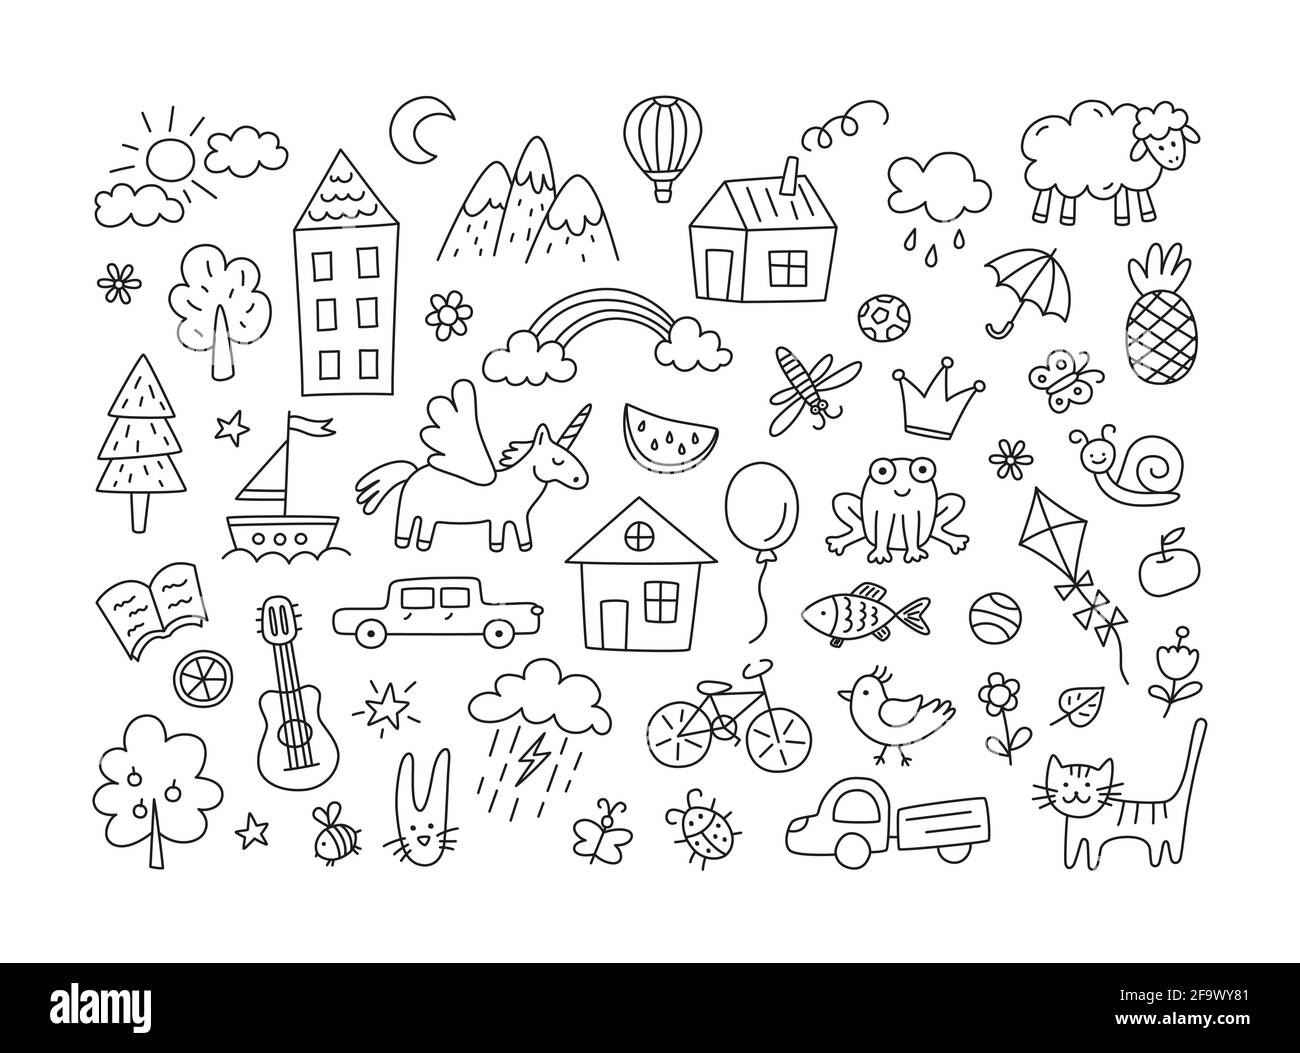 https://c8.alamy.com/comp/2F9WY81/a-set-of-children-drawings-kid-doodle-sun-in-the-clouds-summer-flowers-painted-houses-cute-cat-and-other-black-and-white-elements-vector-2F9WY81.jpg